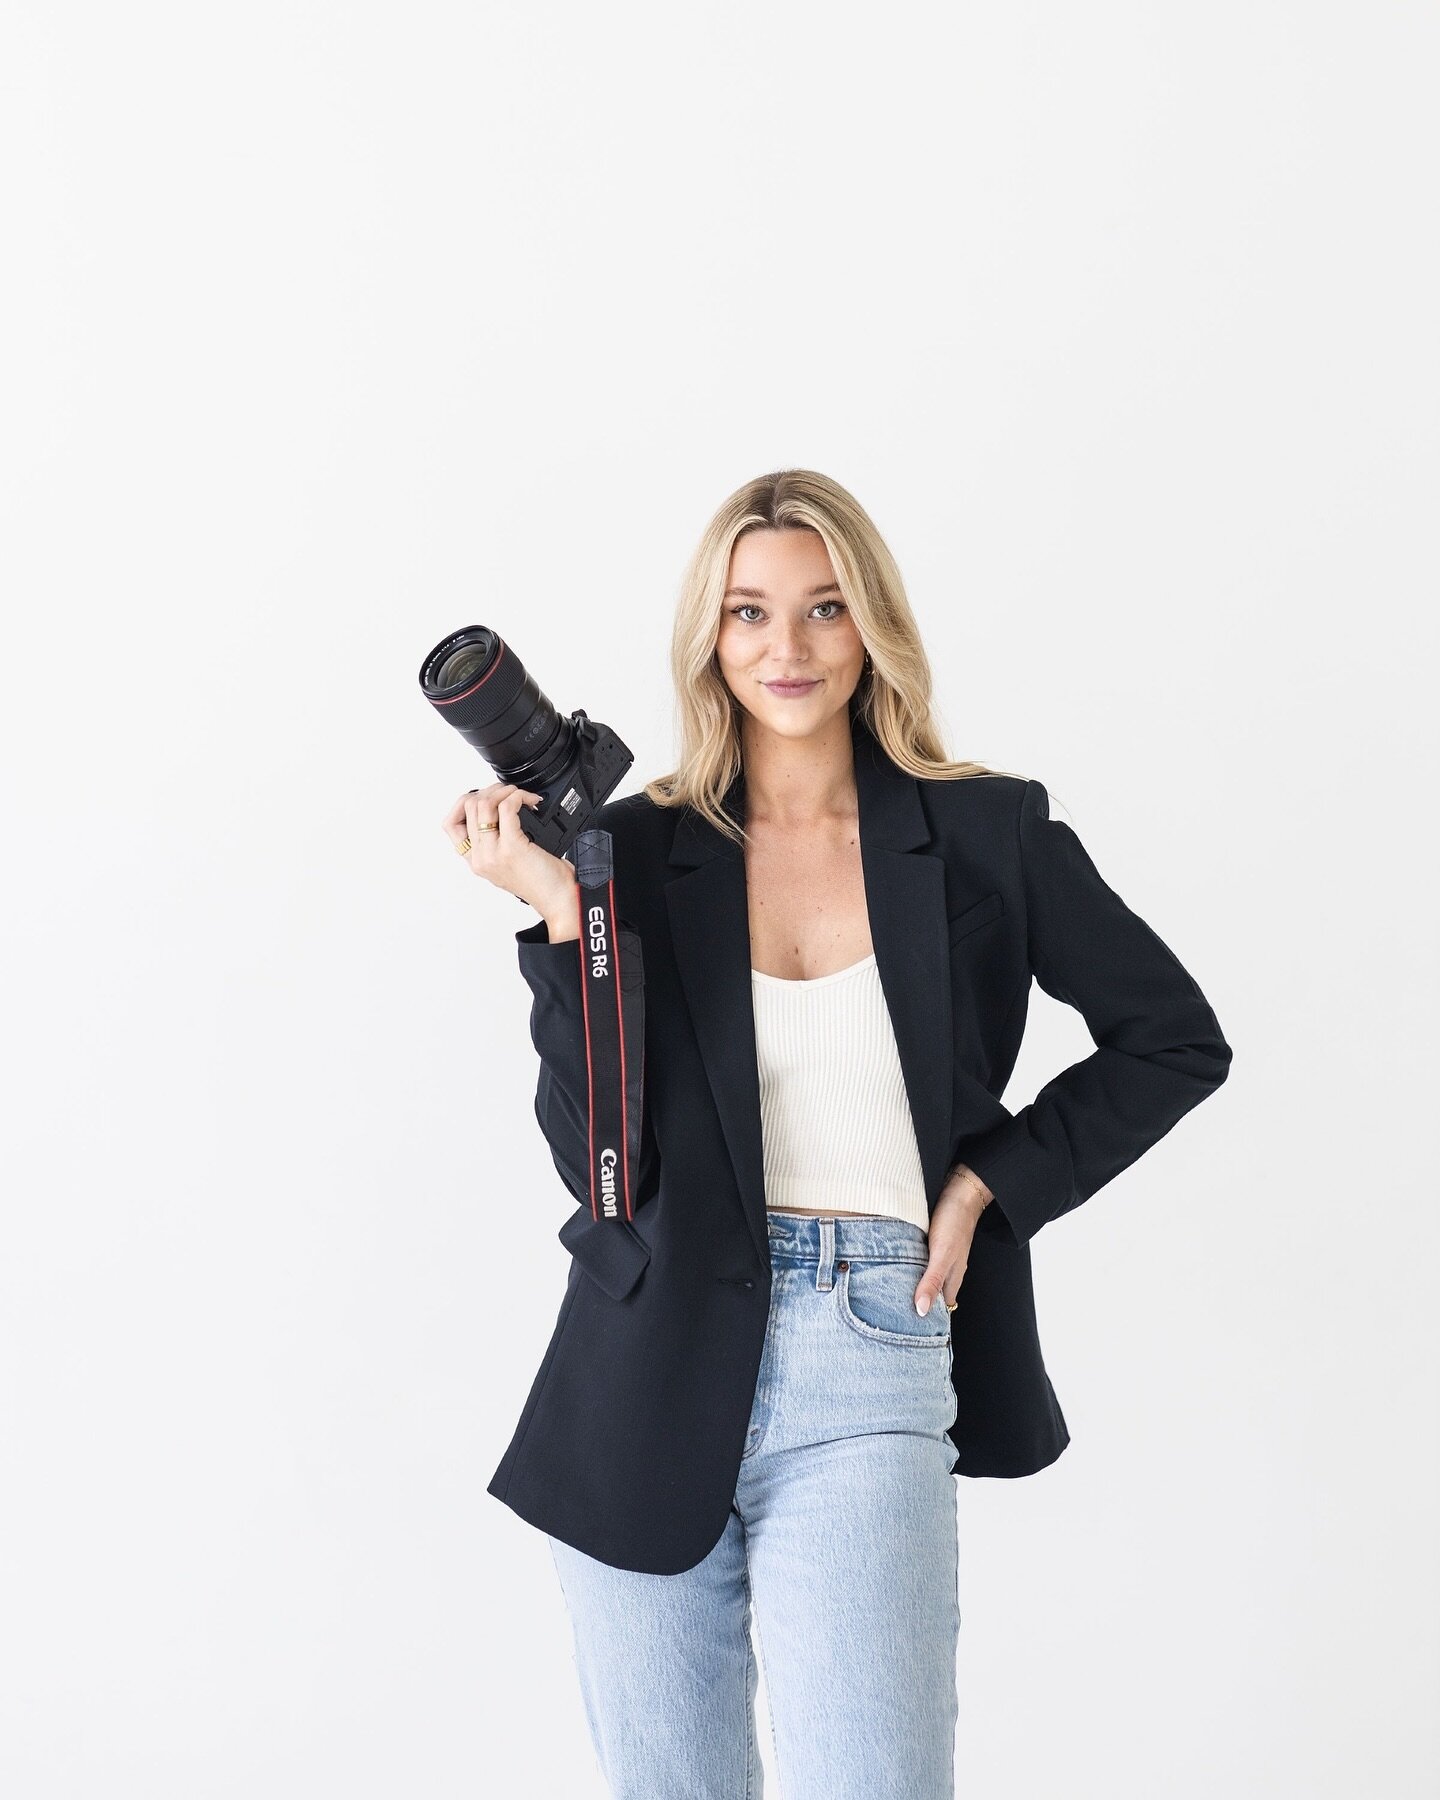 Meet @shannonhamblin🌿

Co-Owner &amp; Creative Director

Your favorite &ldquo;Zillennial&rdquo; marketing pro, Shannon will help take your creative strategies to the next level. Between a Master&rsquo;s Degree in Marketing &amp; Communications and 8